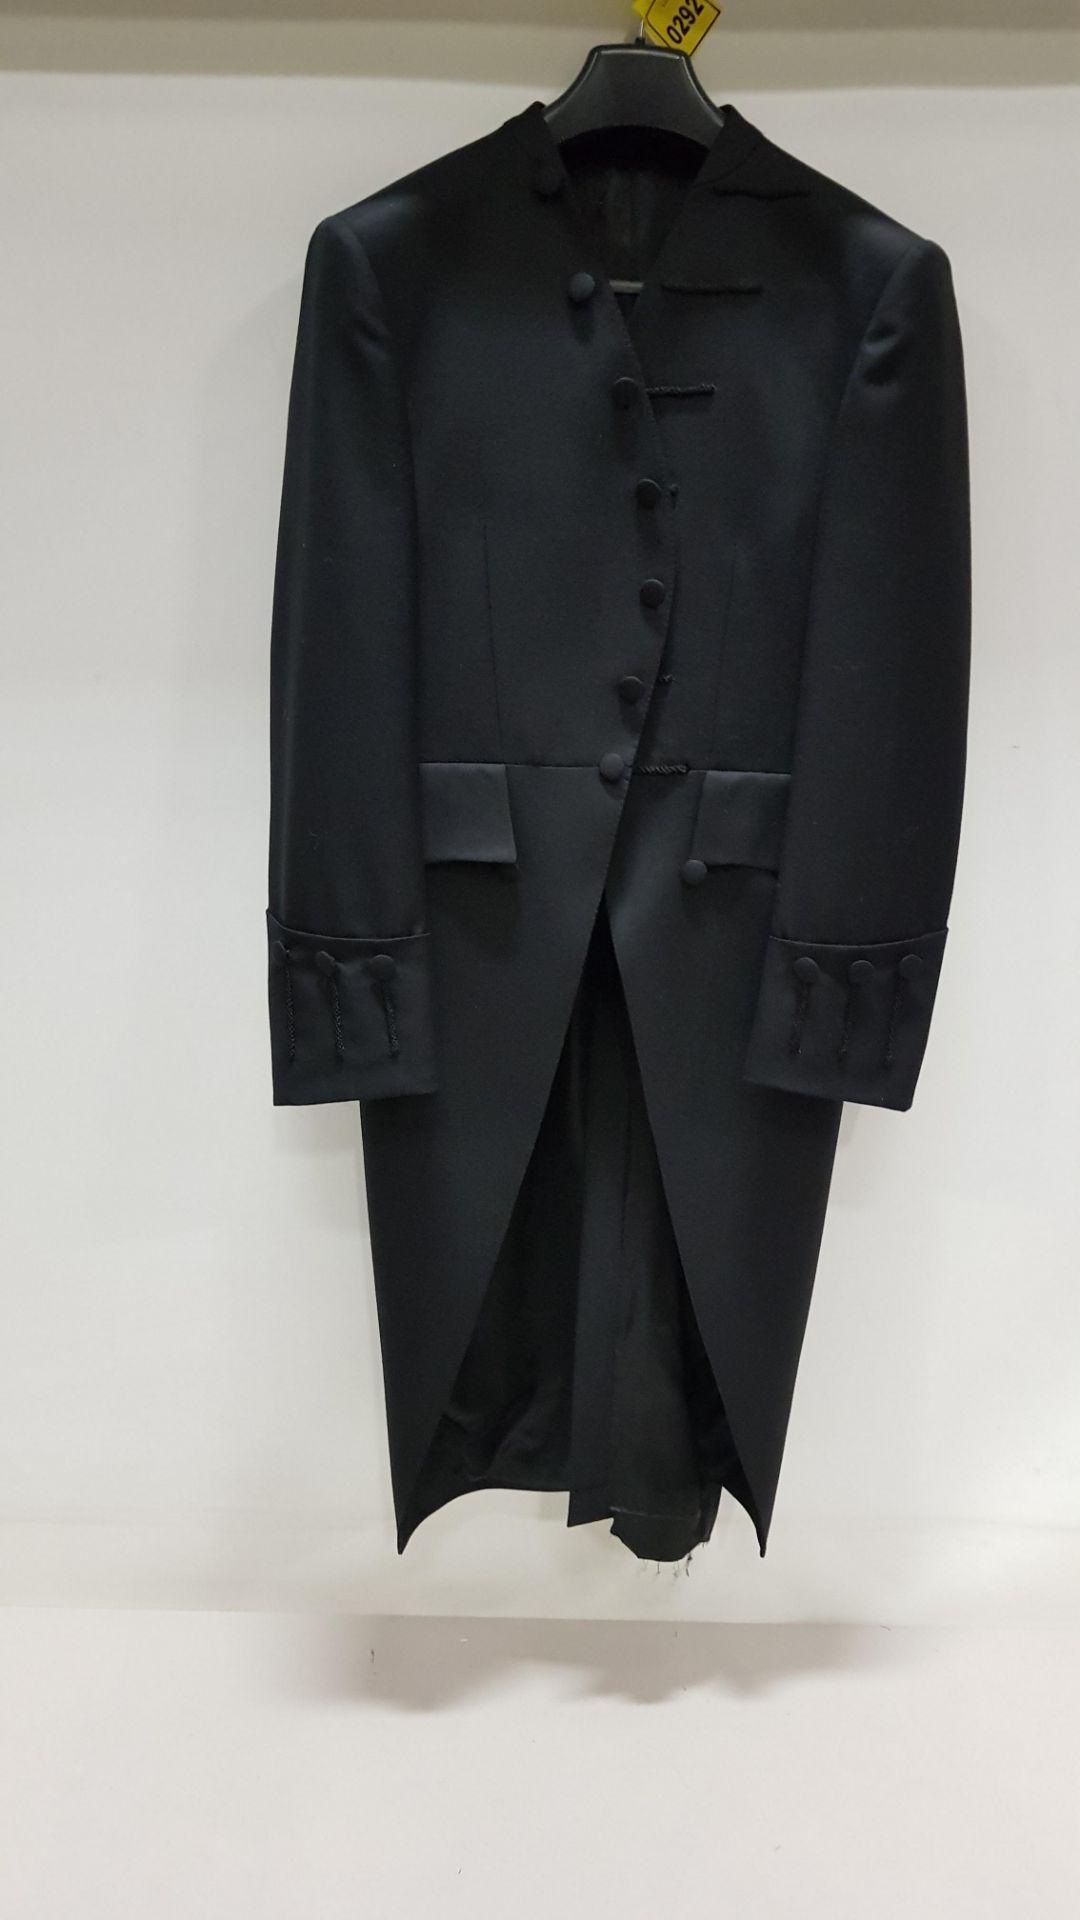 BRAND NEW LUTWYCHE WOOLLEN FULL LENGTH BLACK GOTHIC STYLE JACKET SIZE 40R (PART TAILORED - FINISHING